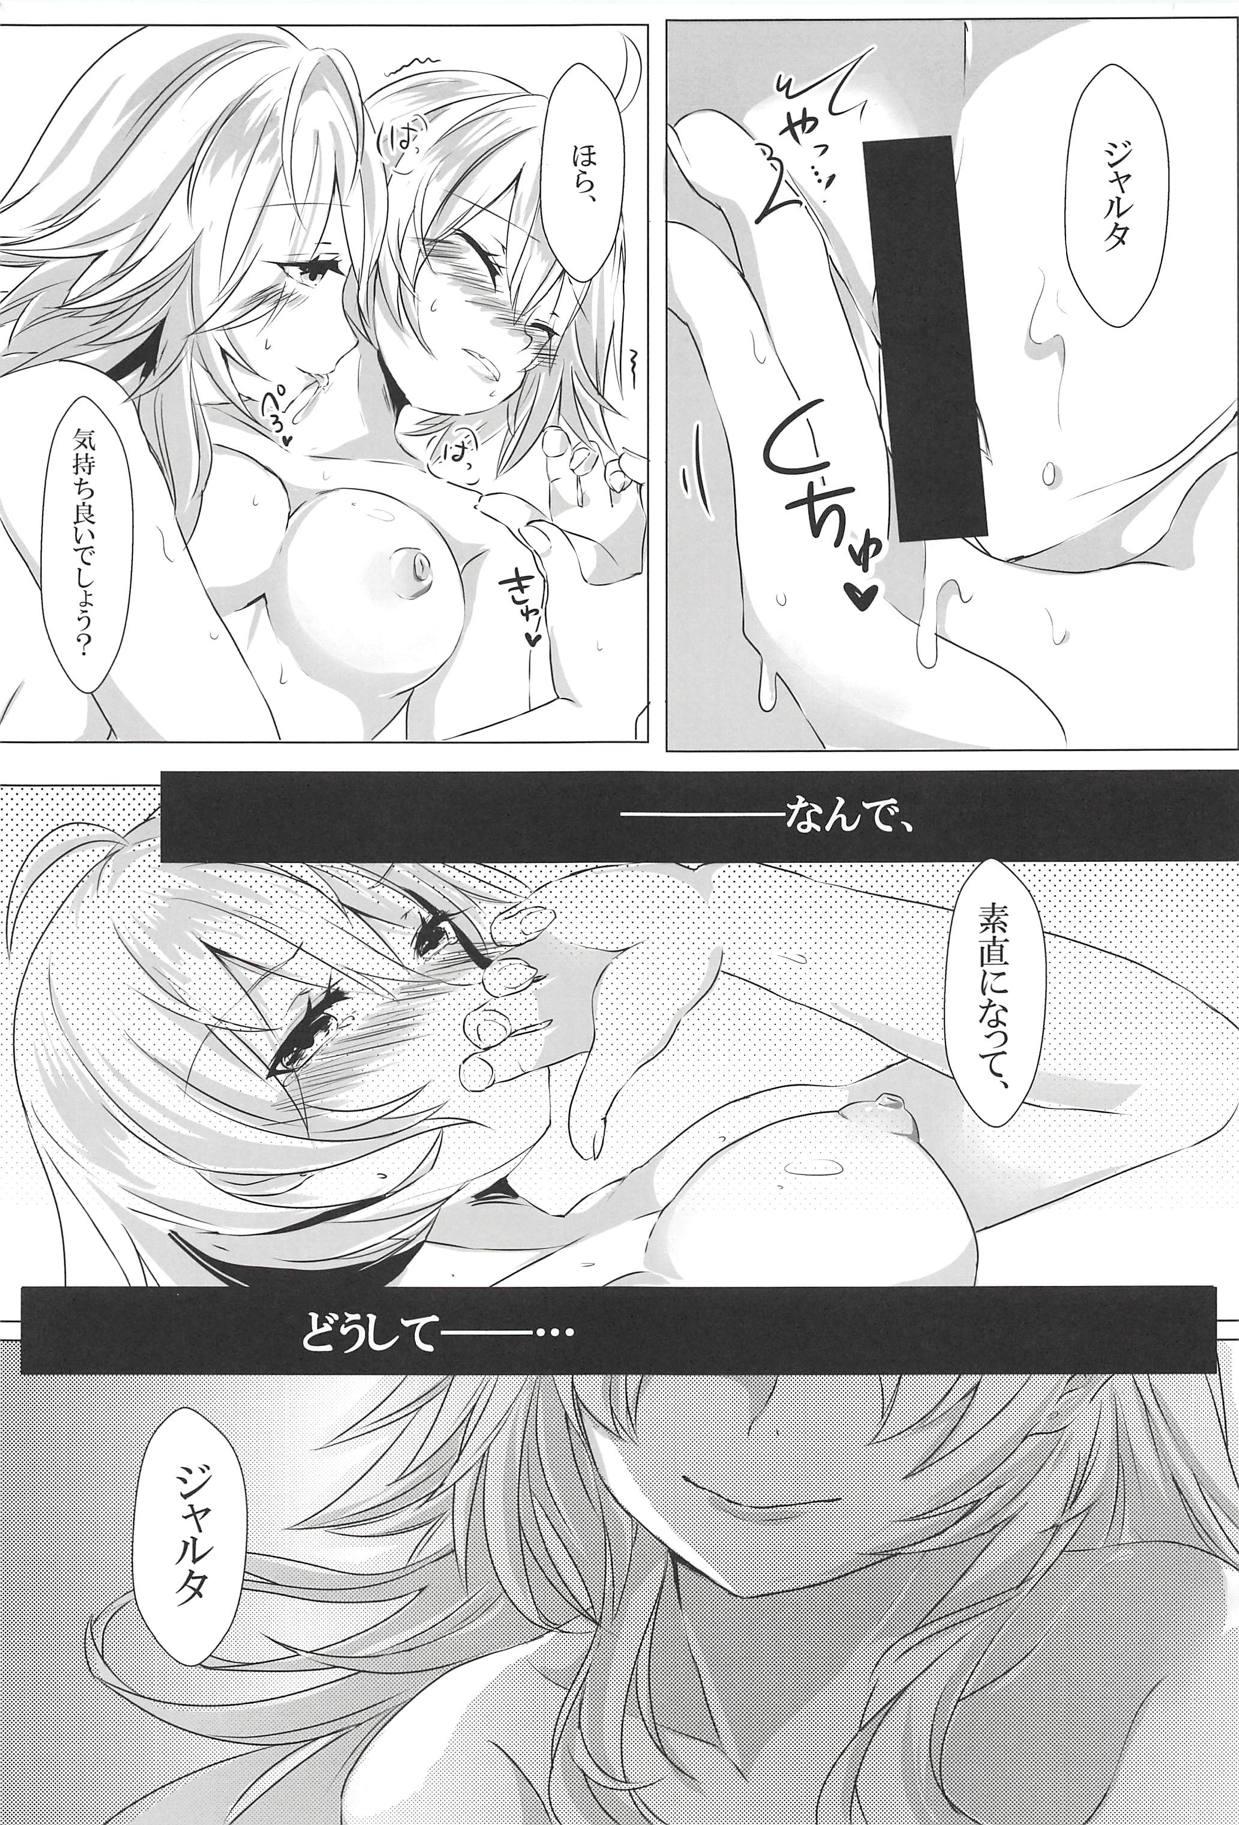 Fist TWIN SCANDAL - Fate grand order Desi - Page 6